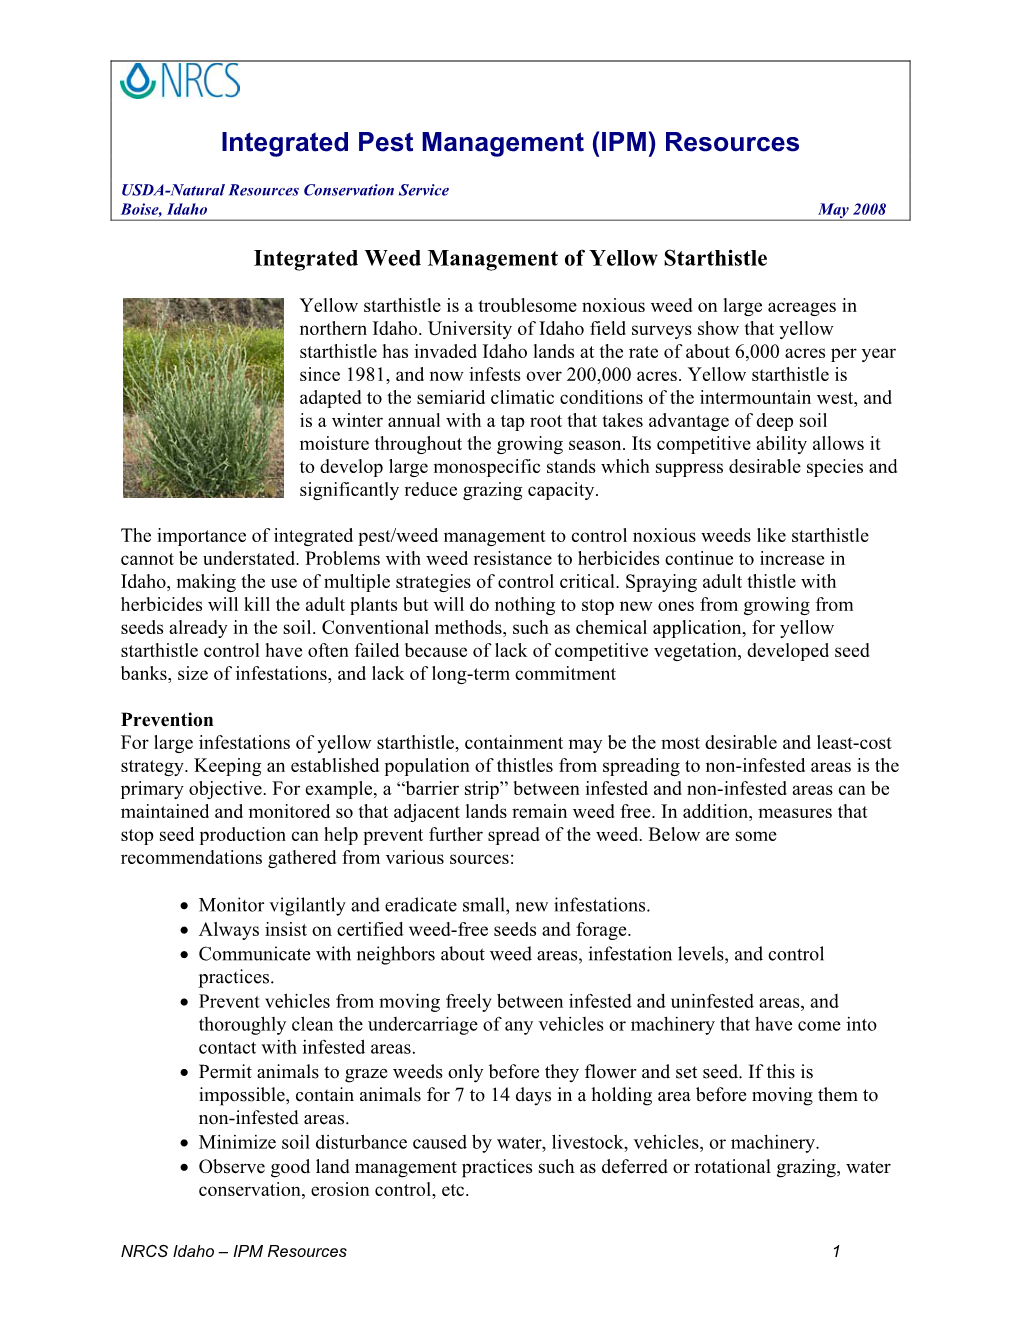 Integrated Weed Management of Yellow Starthistle